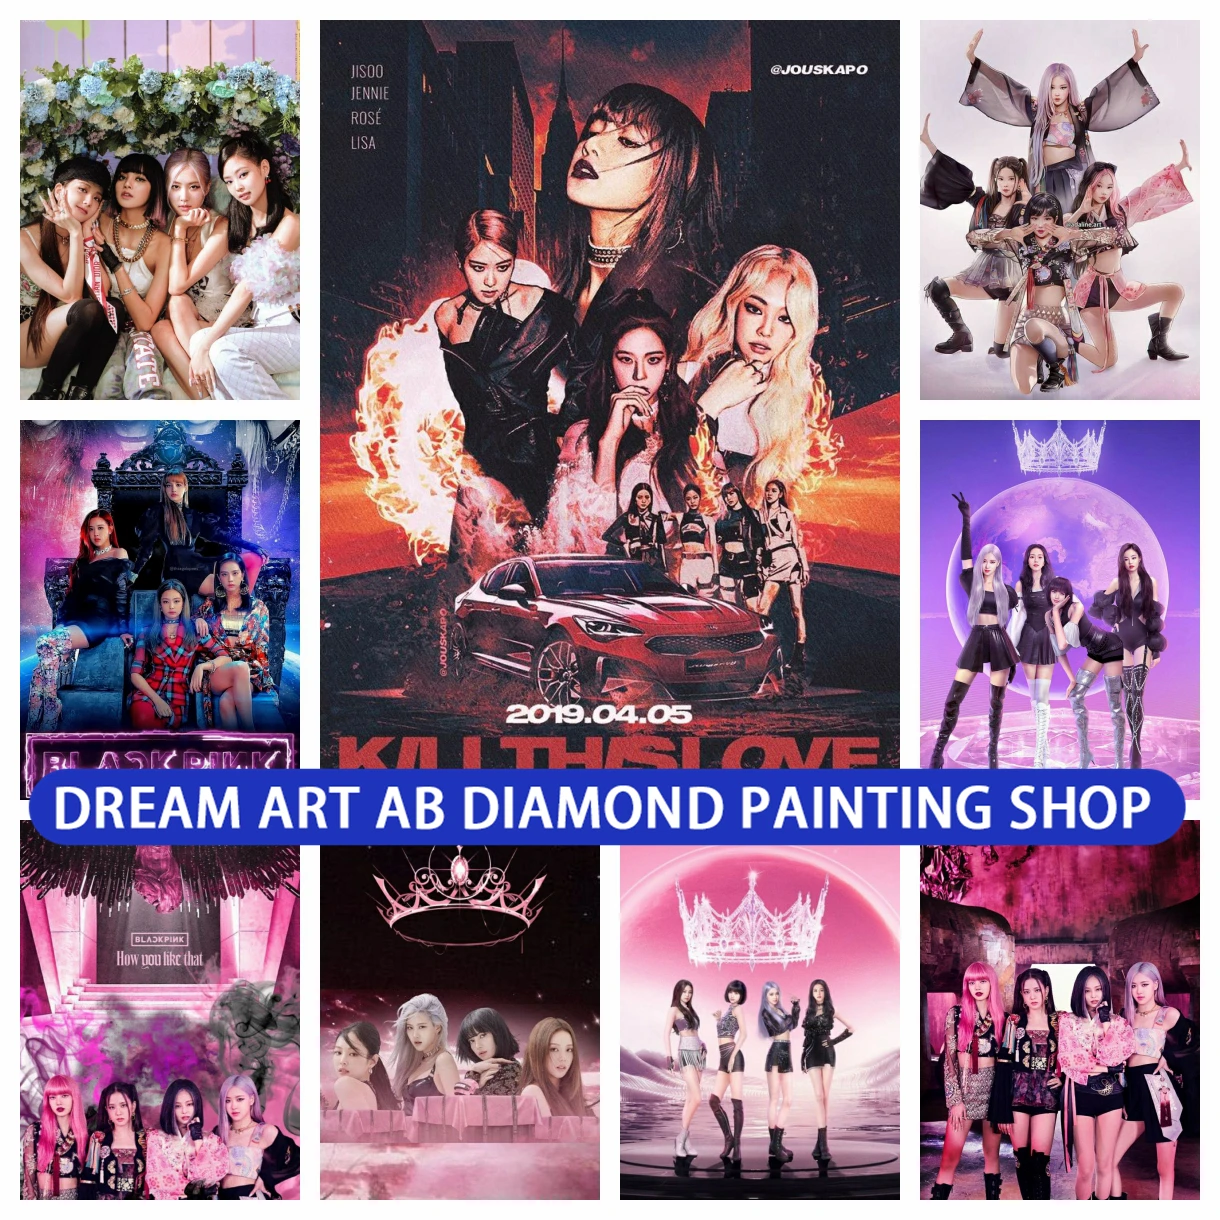 

Jisoo Rose Kpop Band 5D Korean Group Black Girl Pink Diamond Painting Wall Art Cross Stitch Embroidery Picture Mosaic Home Decor